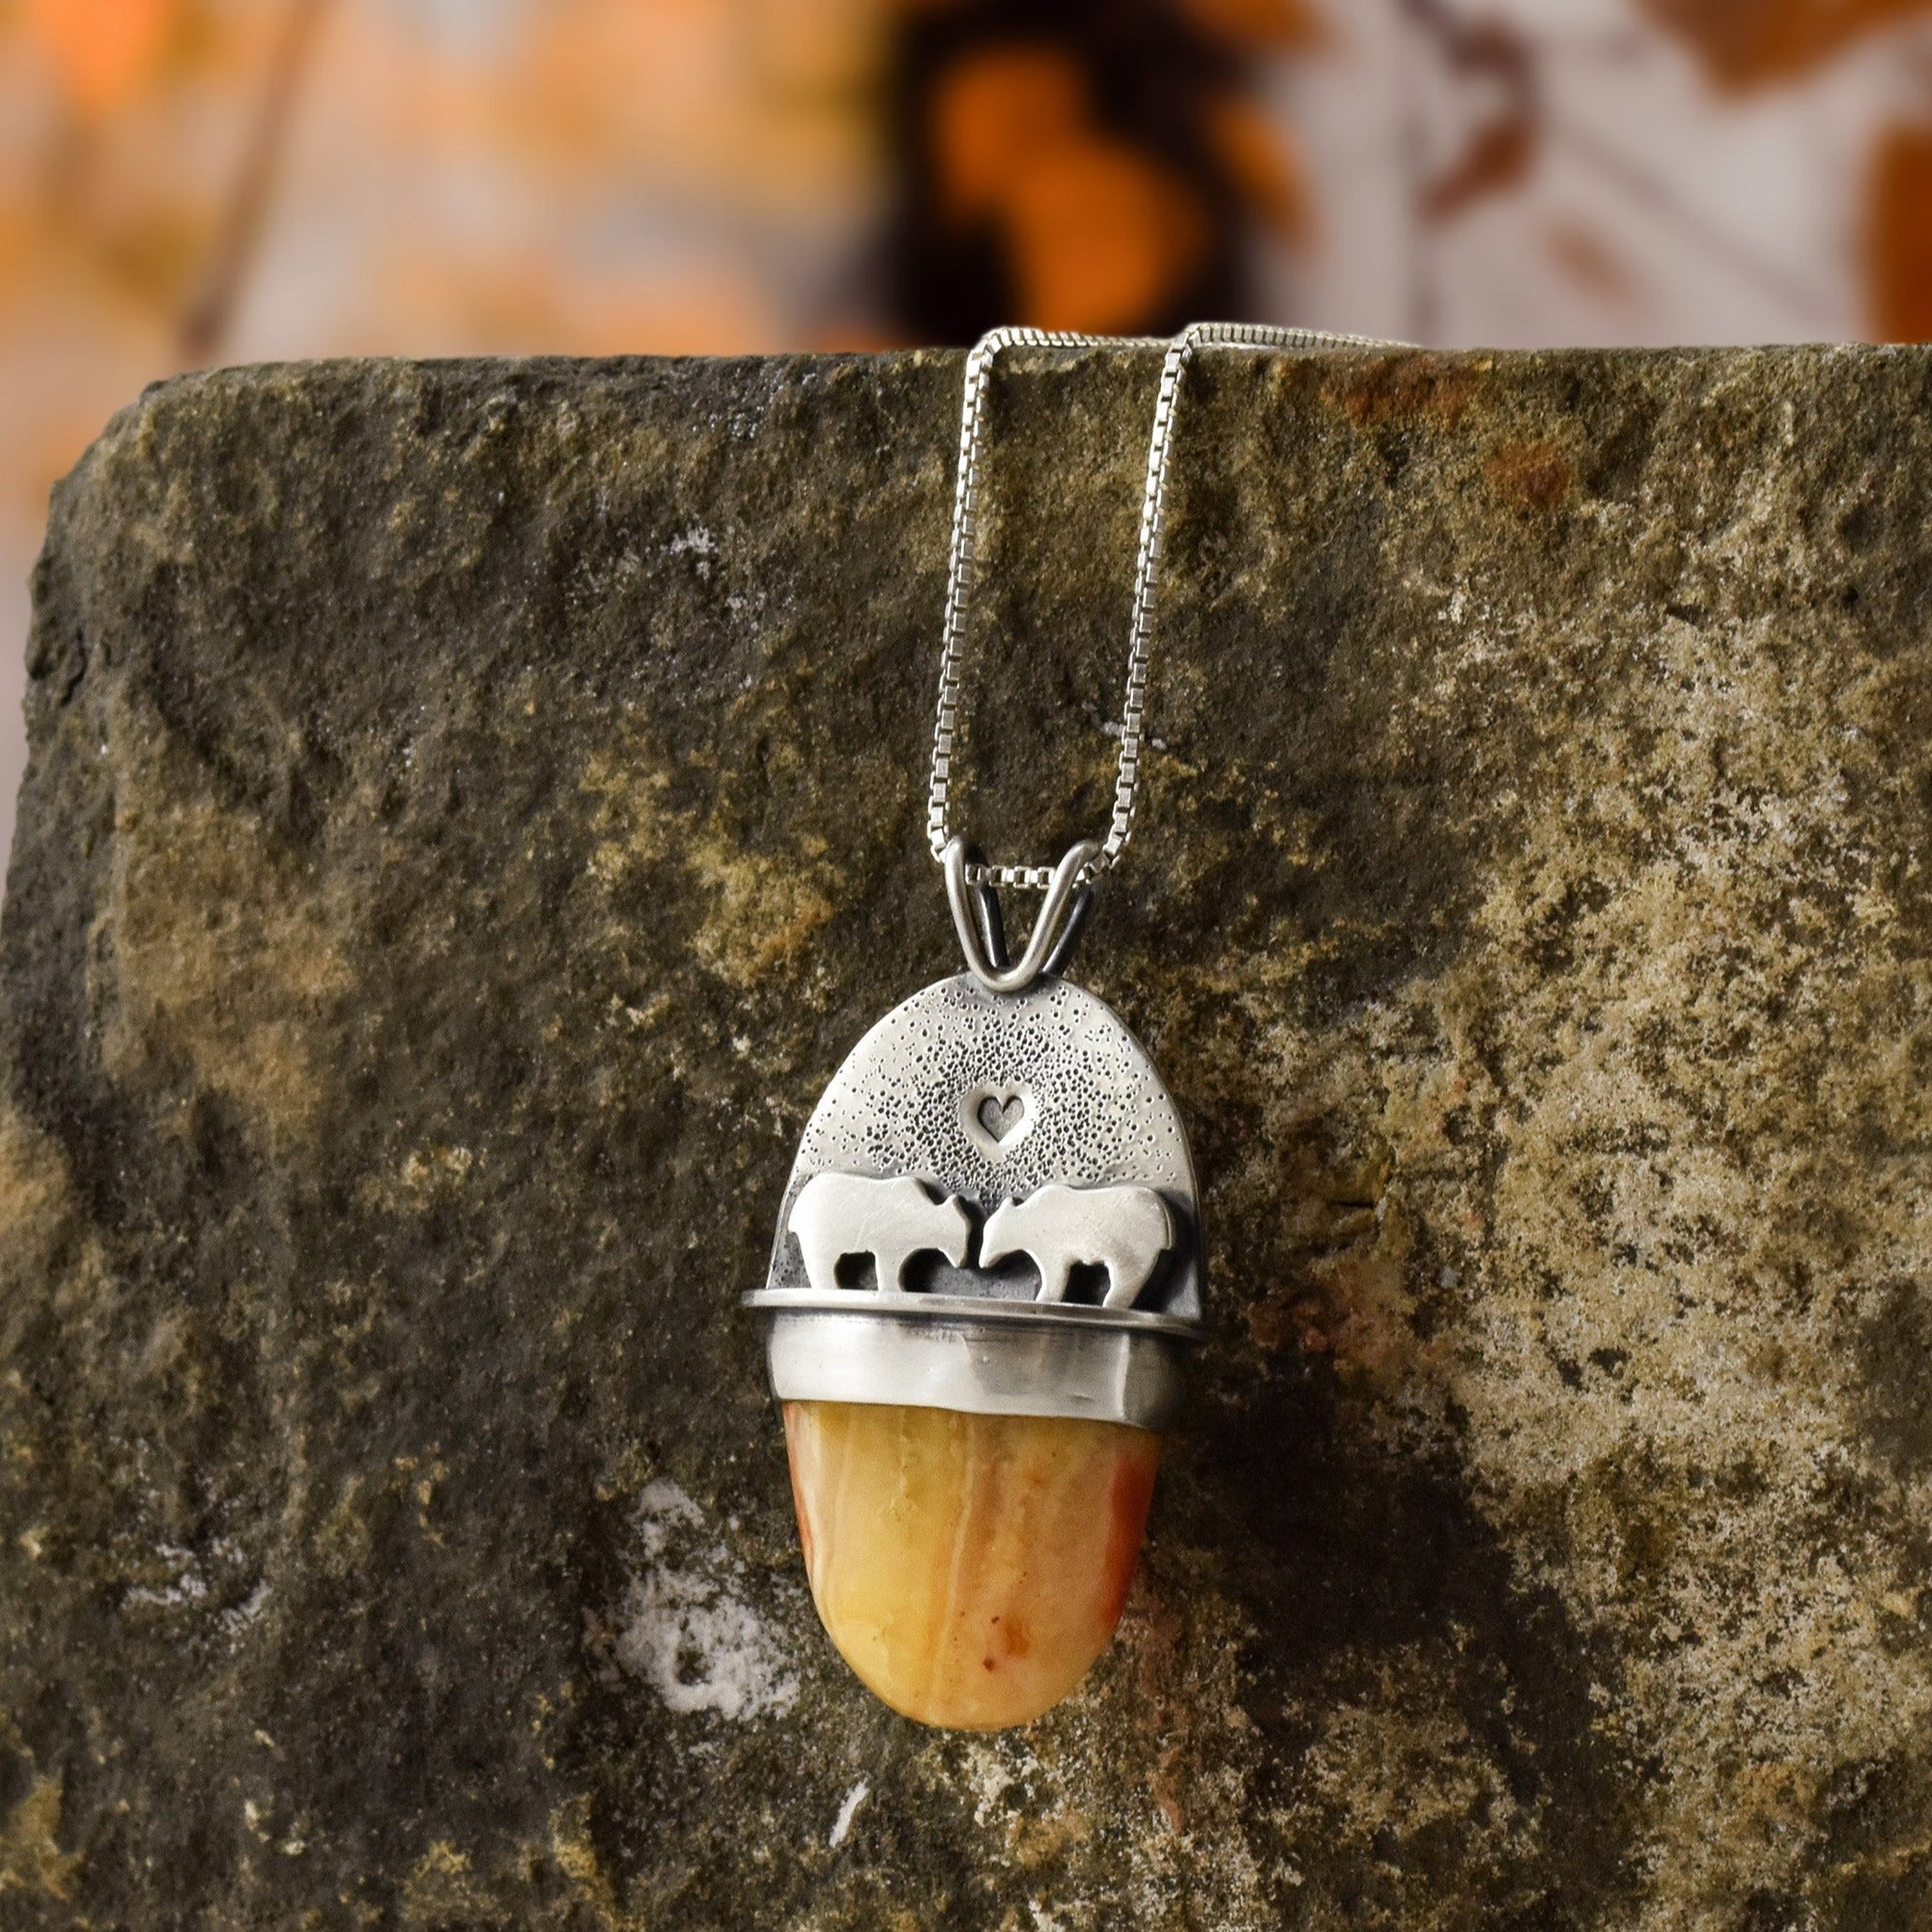 Bear Couple Wonderland Pendant with Marquette Lake Superior Agate - Silver Pendant   6615 - handmade by Beth Millner Jewelry